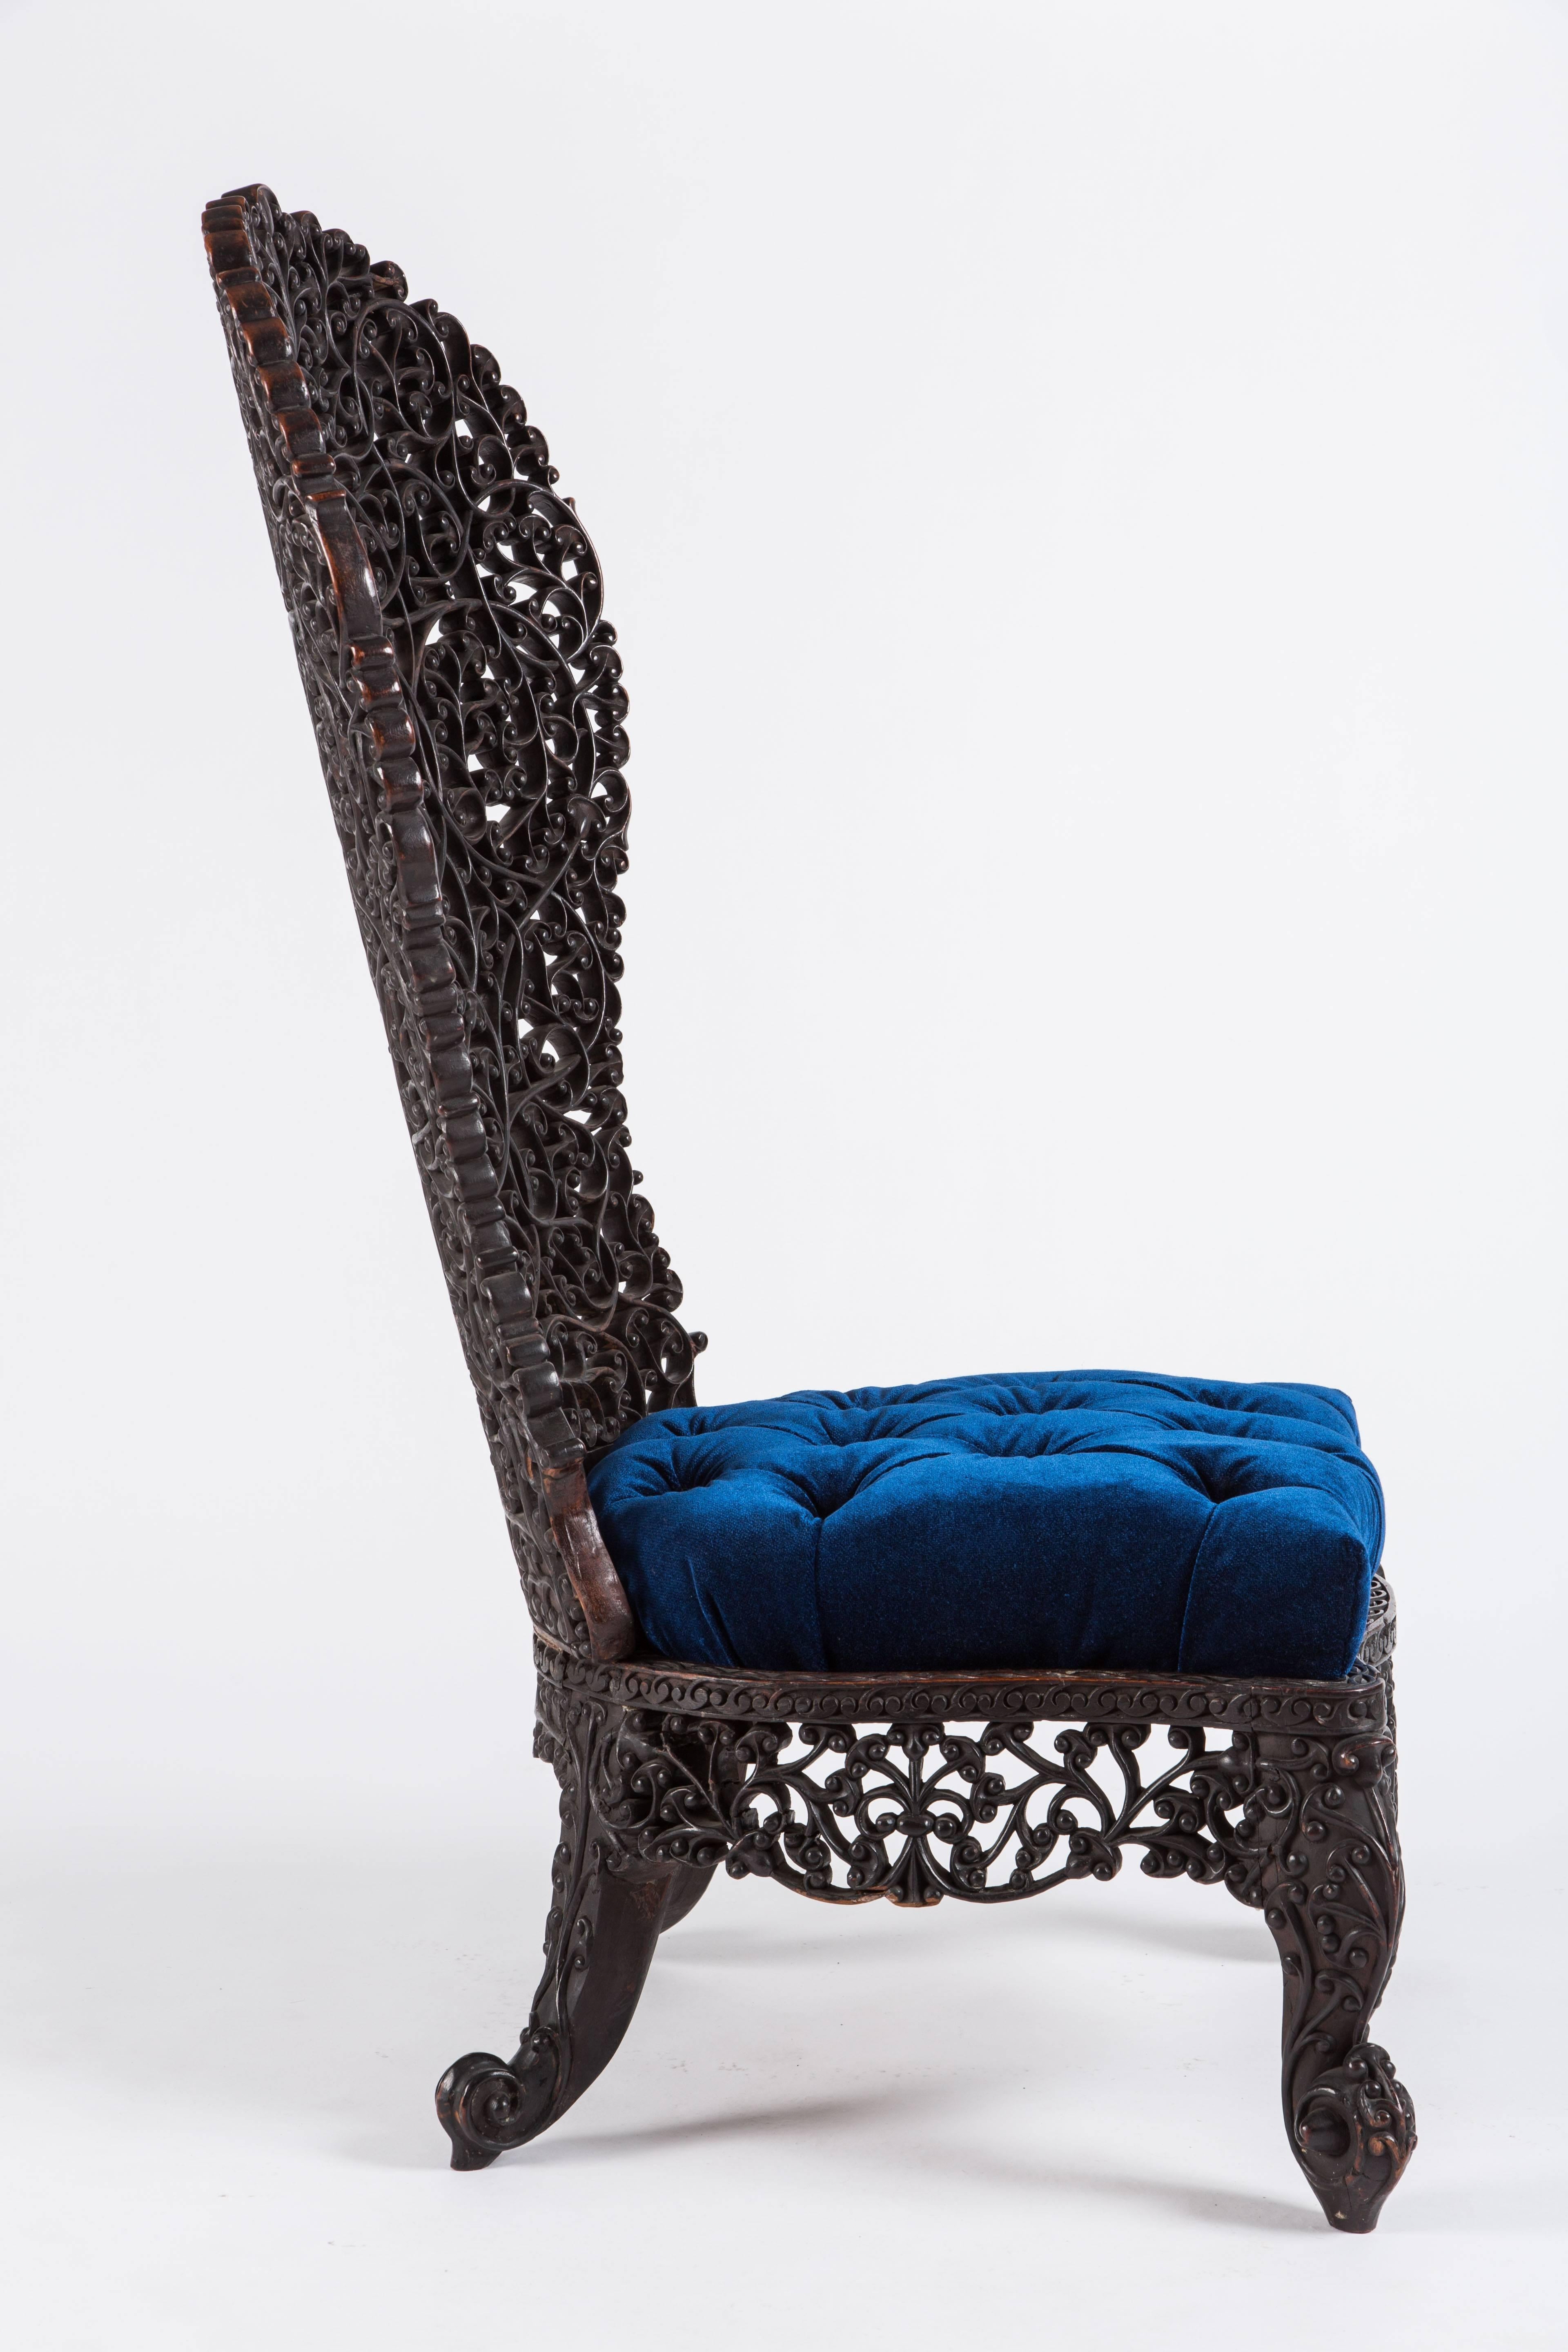 Fantastic Anglo-Indian high backed chair. Intricately carved throughout with leaf motif, with a newly upholstered tufted blue velvet seat. The seat measures 17 inches high.

           